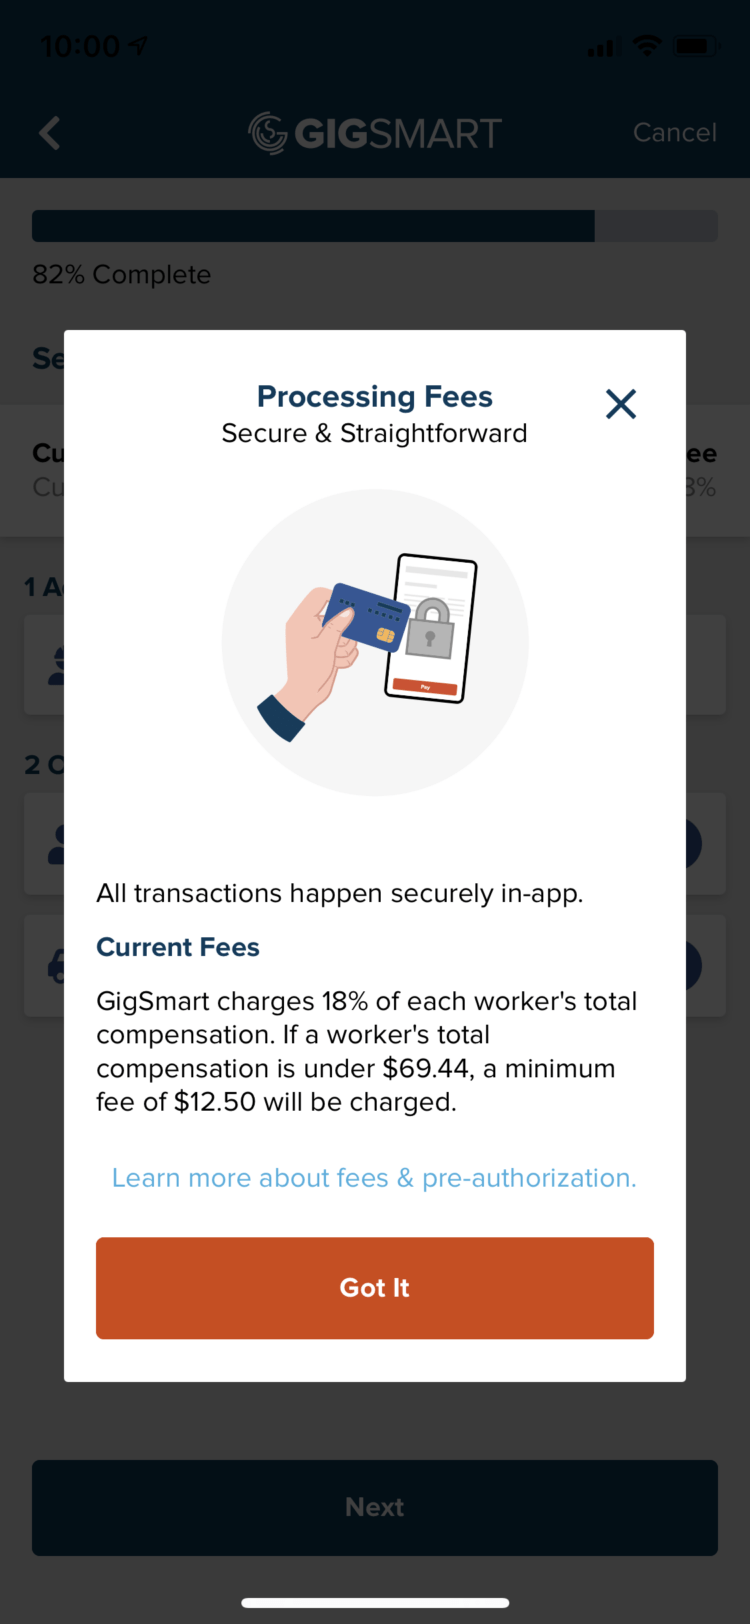 Pay securely through the app